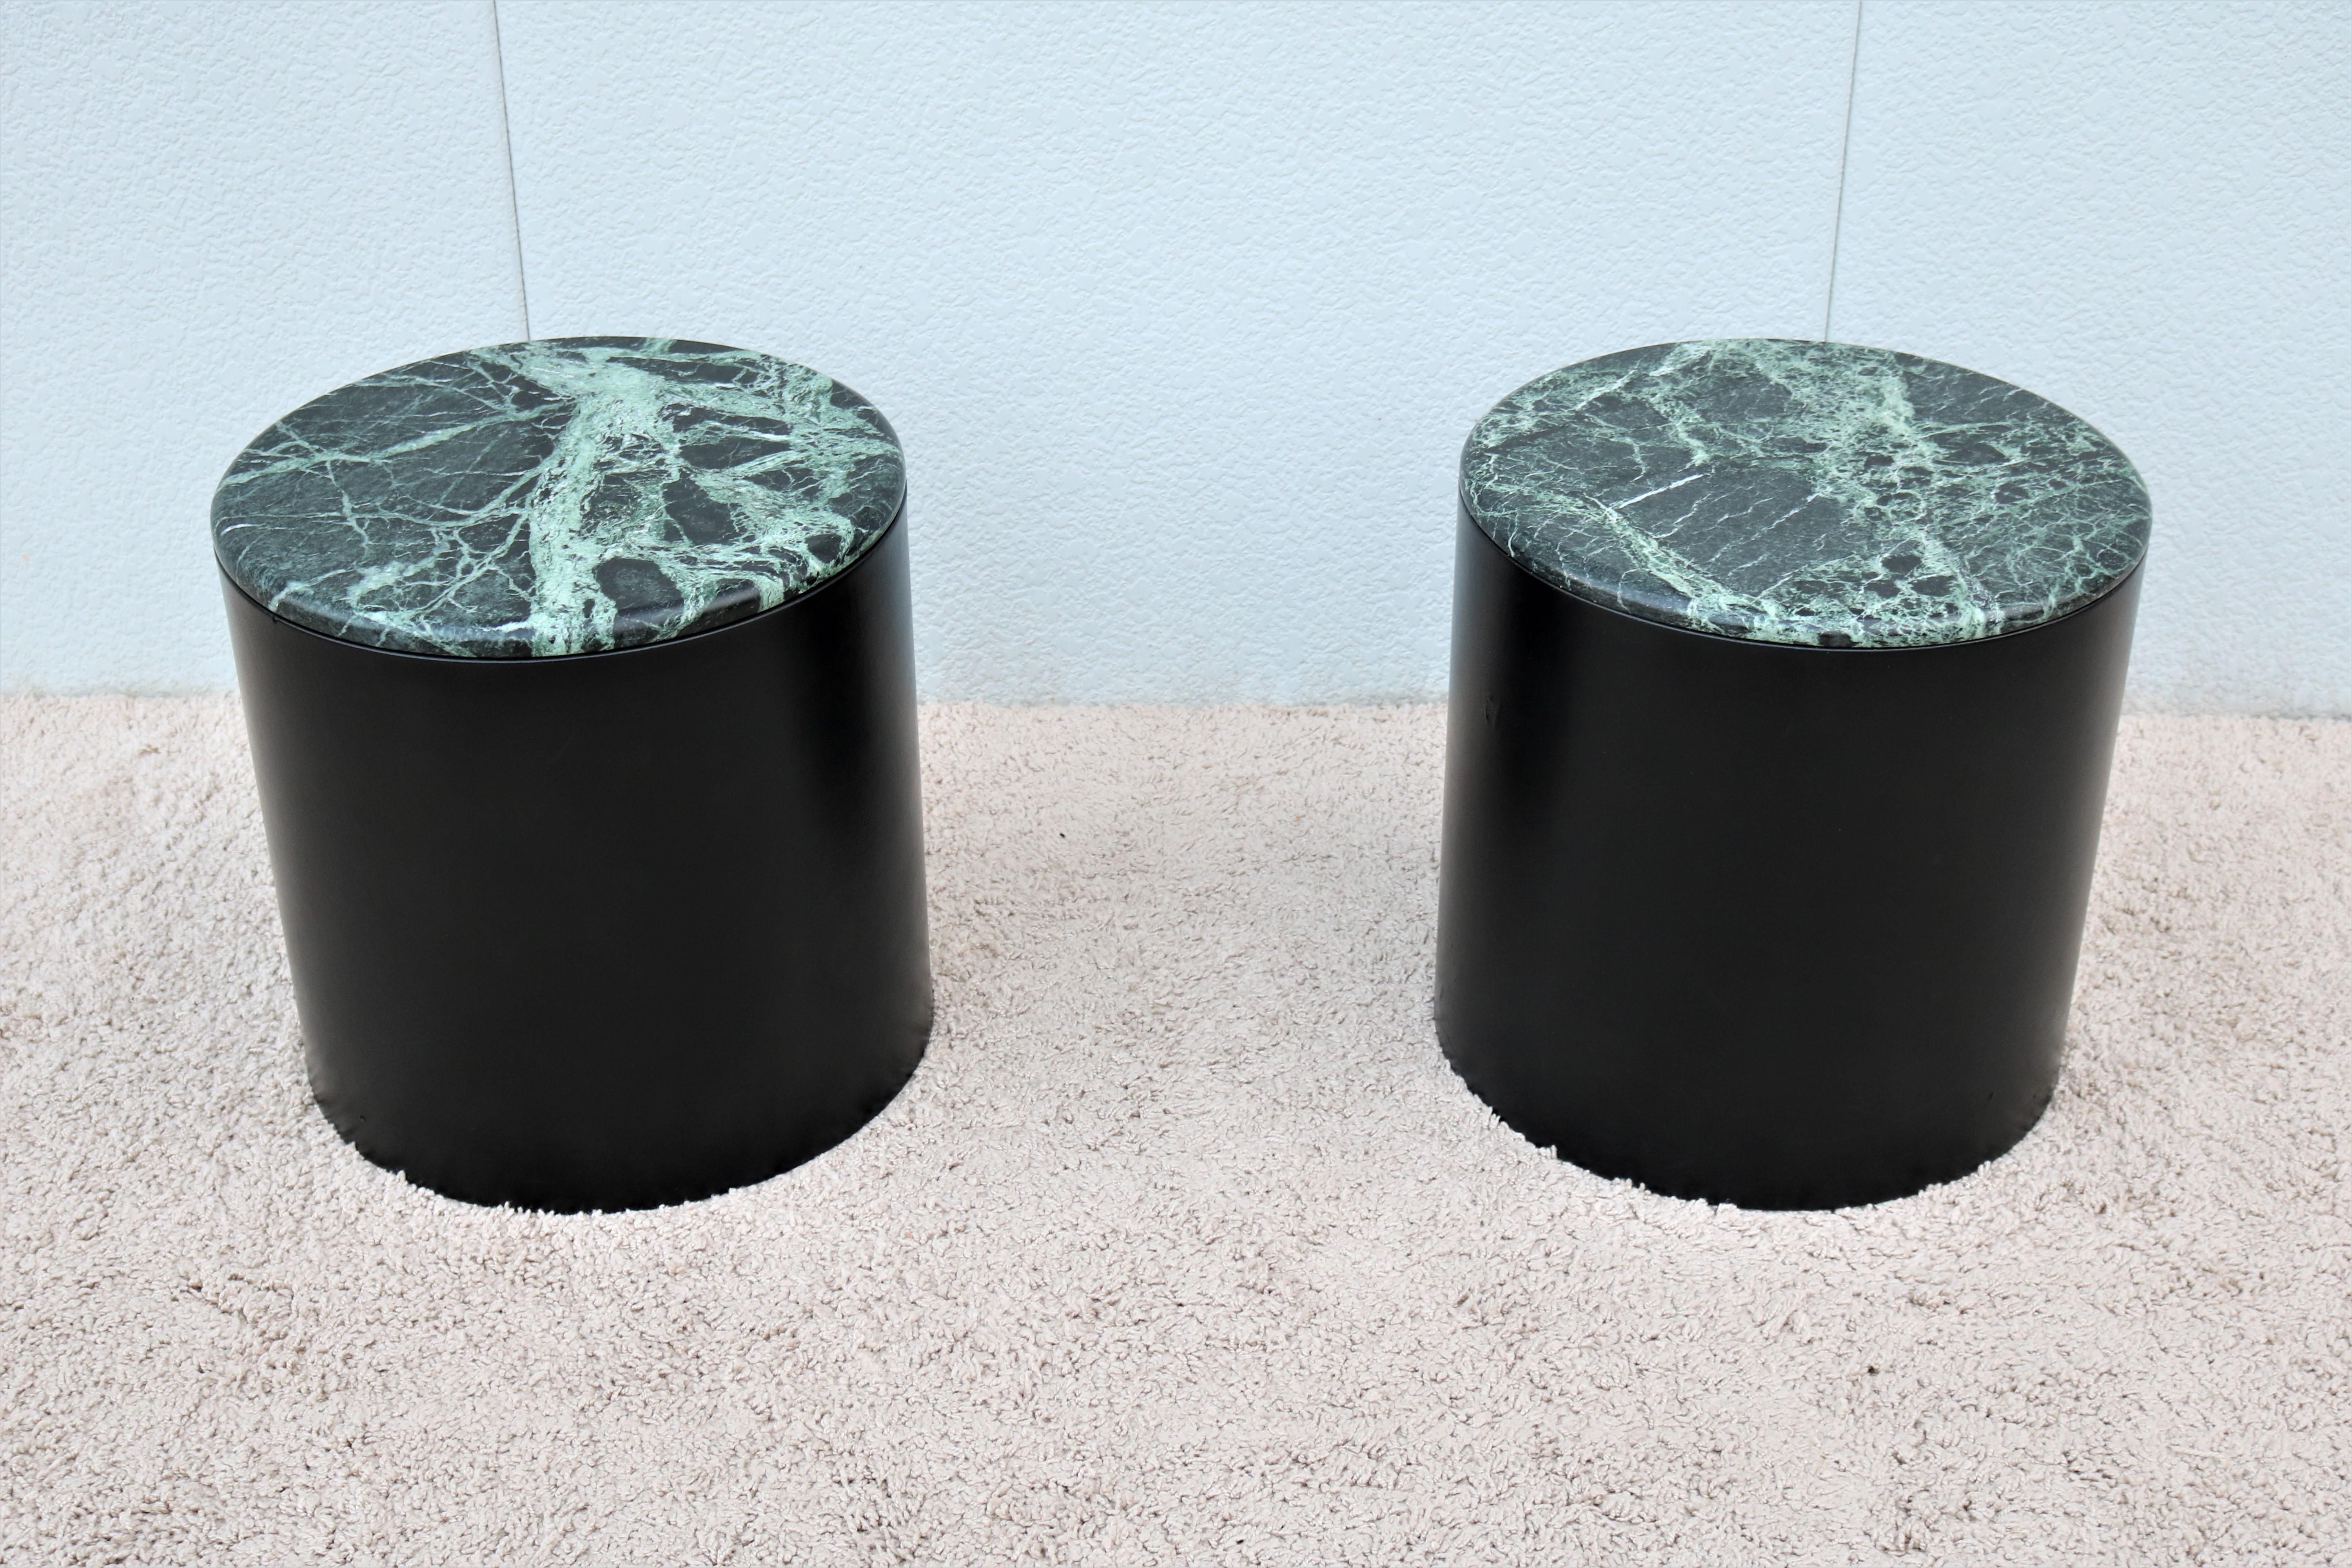 Stunning vintage Paul Mayen style pair of marble top cylinder drum side or end tables.
Classic American Mid-Century Modern designed in 1970 and remains a current timeless and elegant design today. 
Drum tables address a number of functional